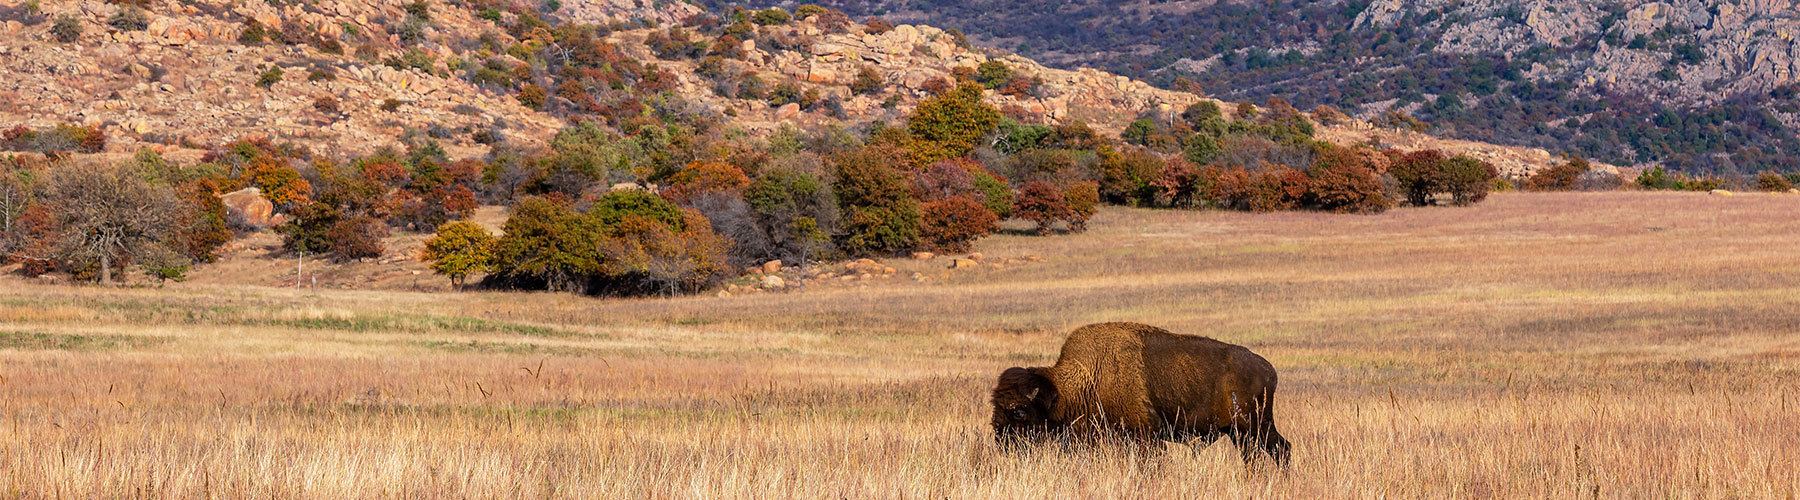 Picture of a buffalo out in a field in the valley. The season in the photo looks like fall.